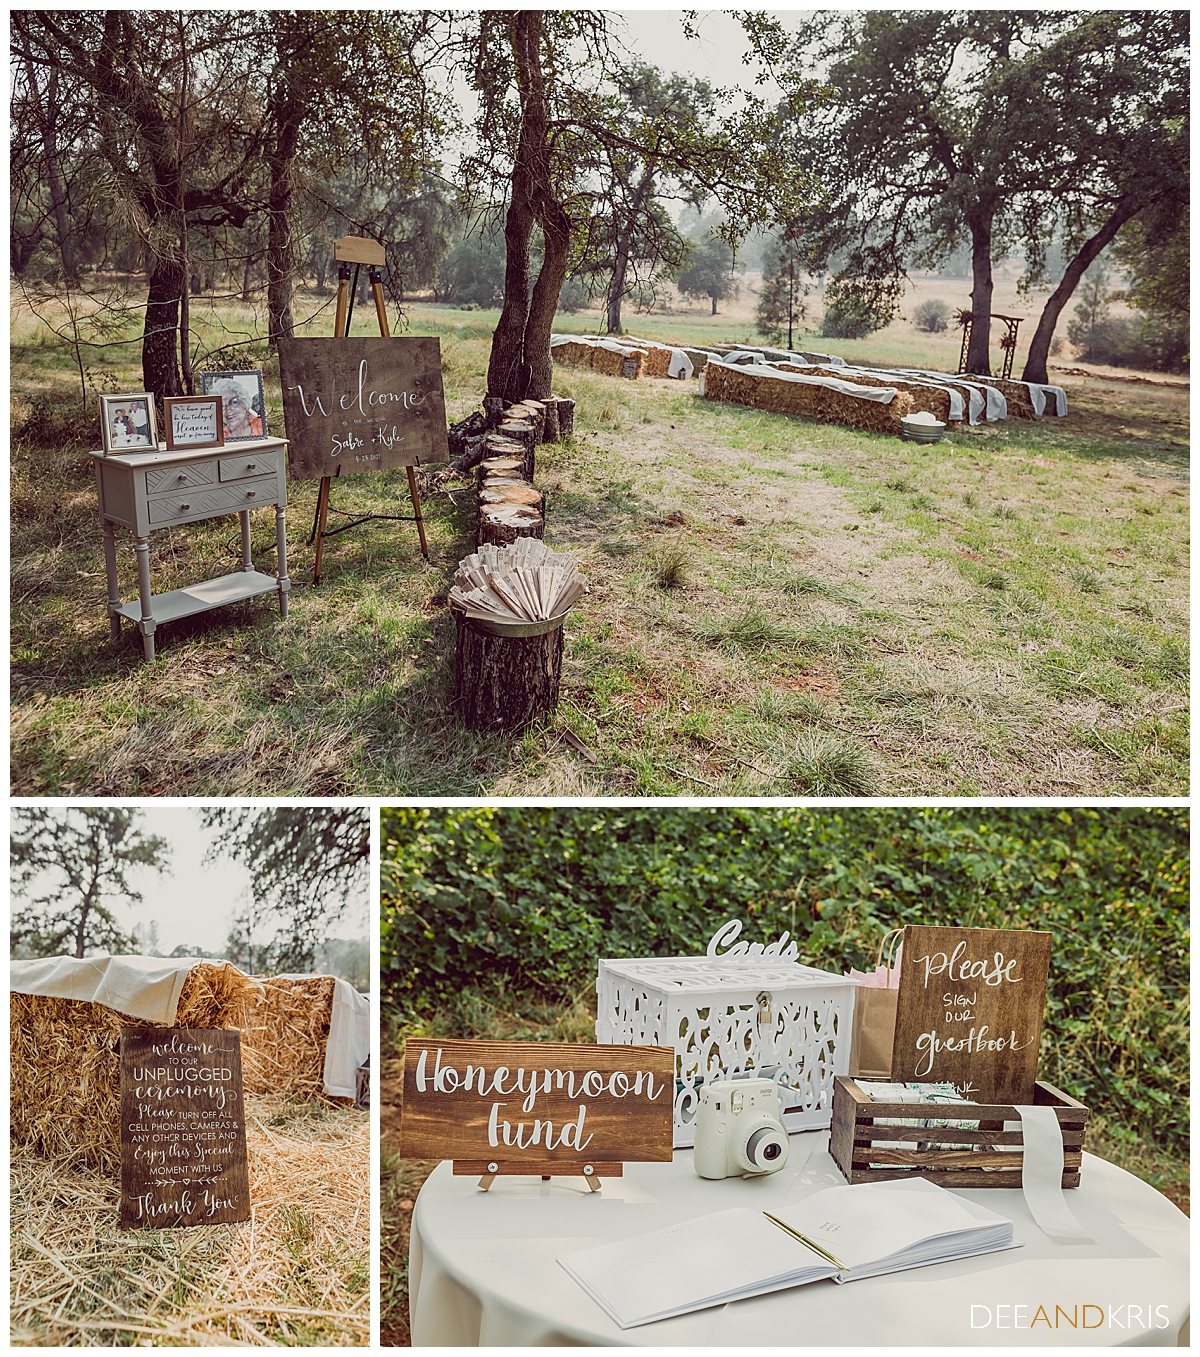 Three images of rustic details including stump lined aisle and wooden signs.